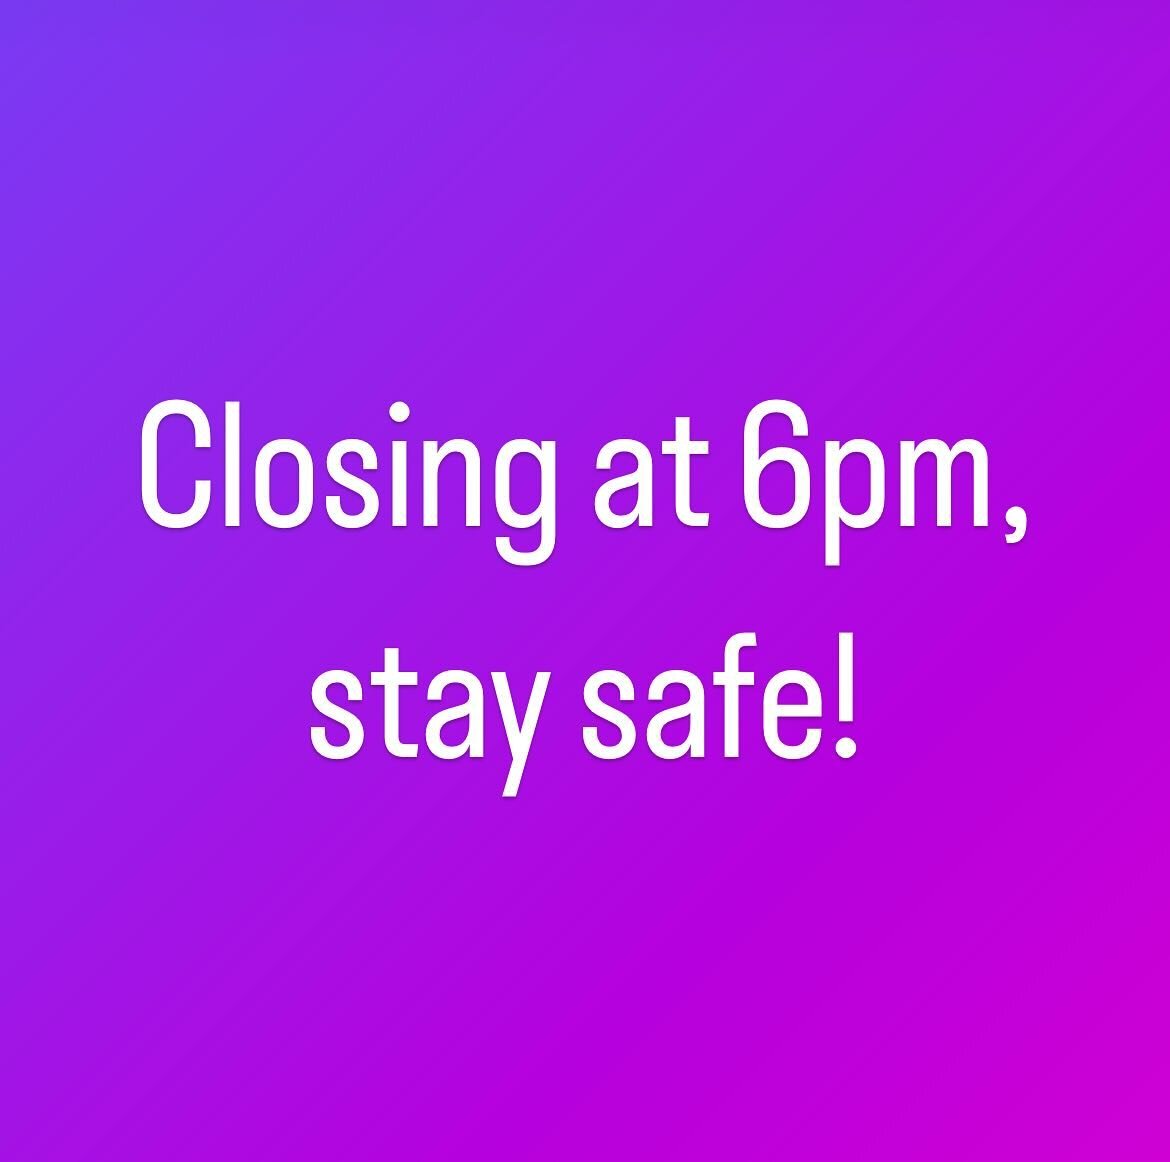 Hey folks, we&rsquo;re gonna close up shop at 6pm tonight. Stay safe out there! Back at it tomorrow at noon. #snowstorm